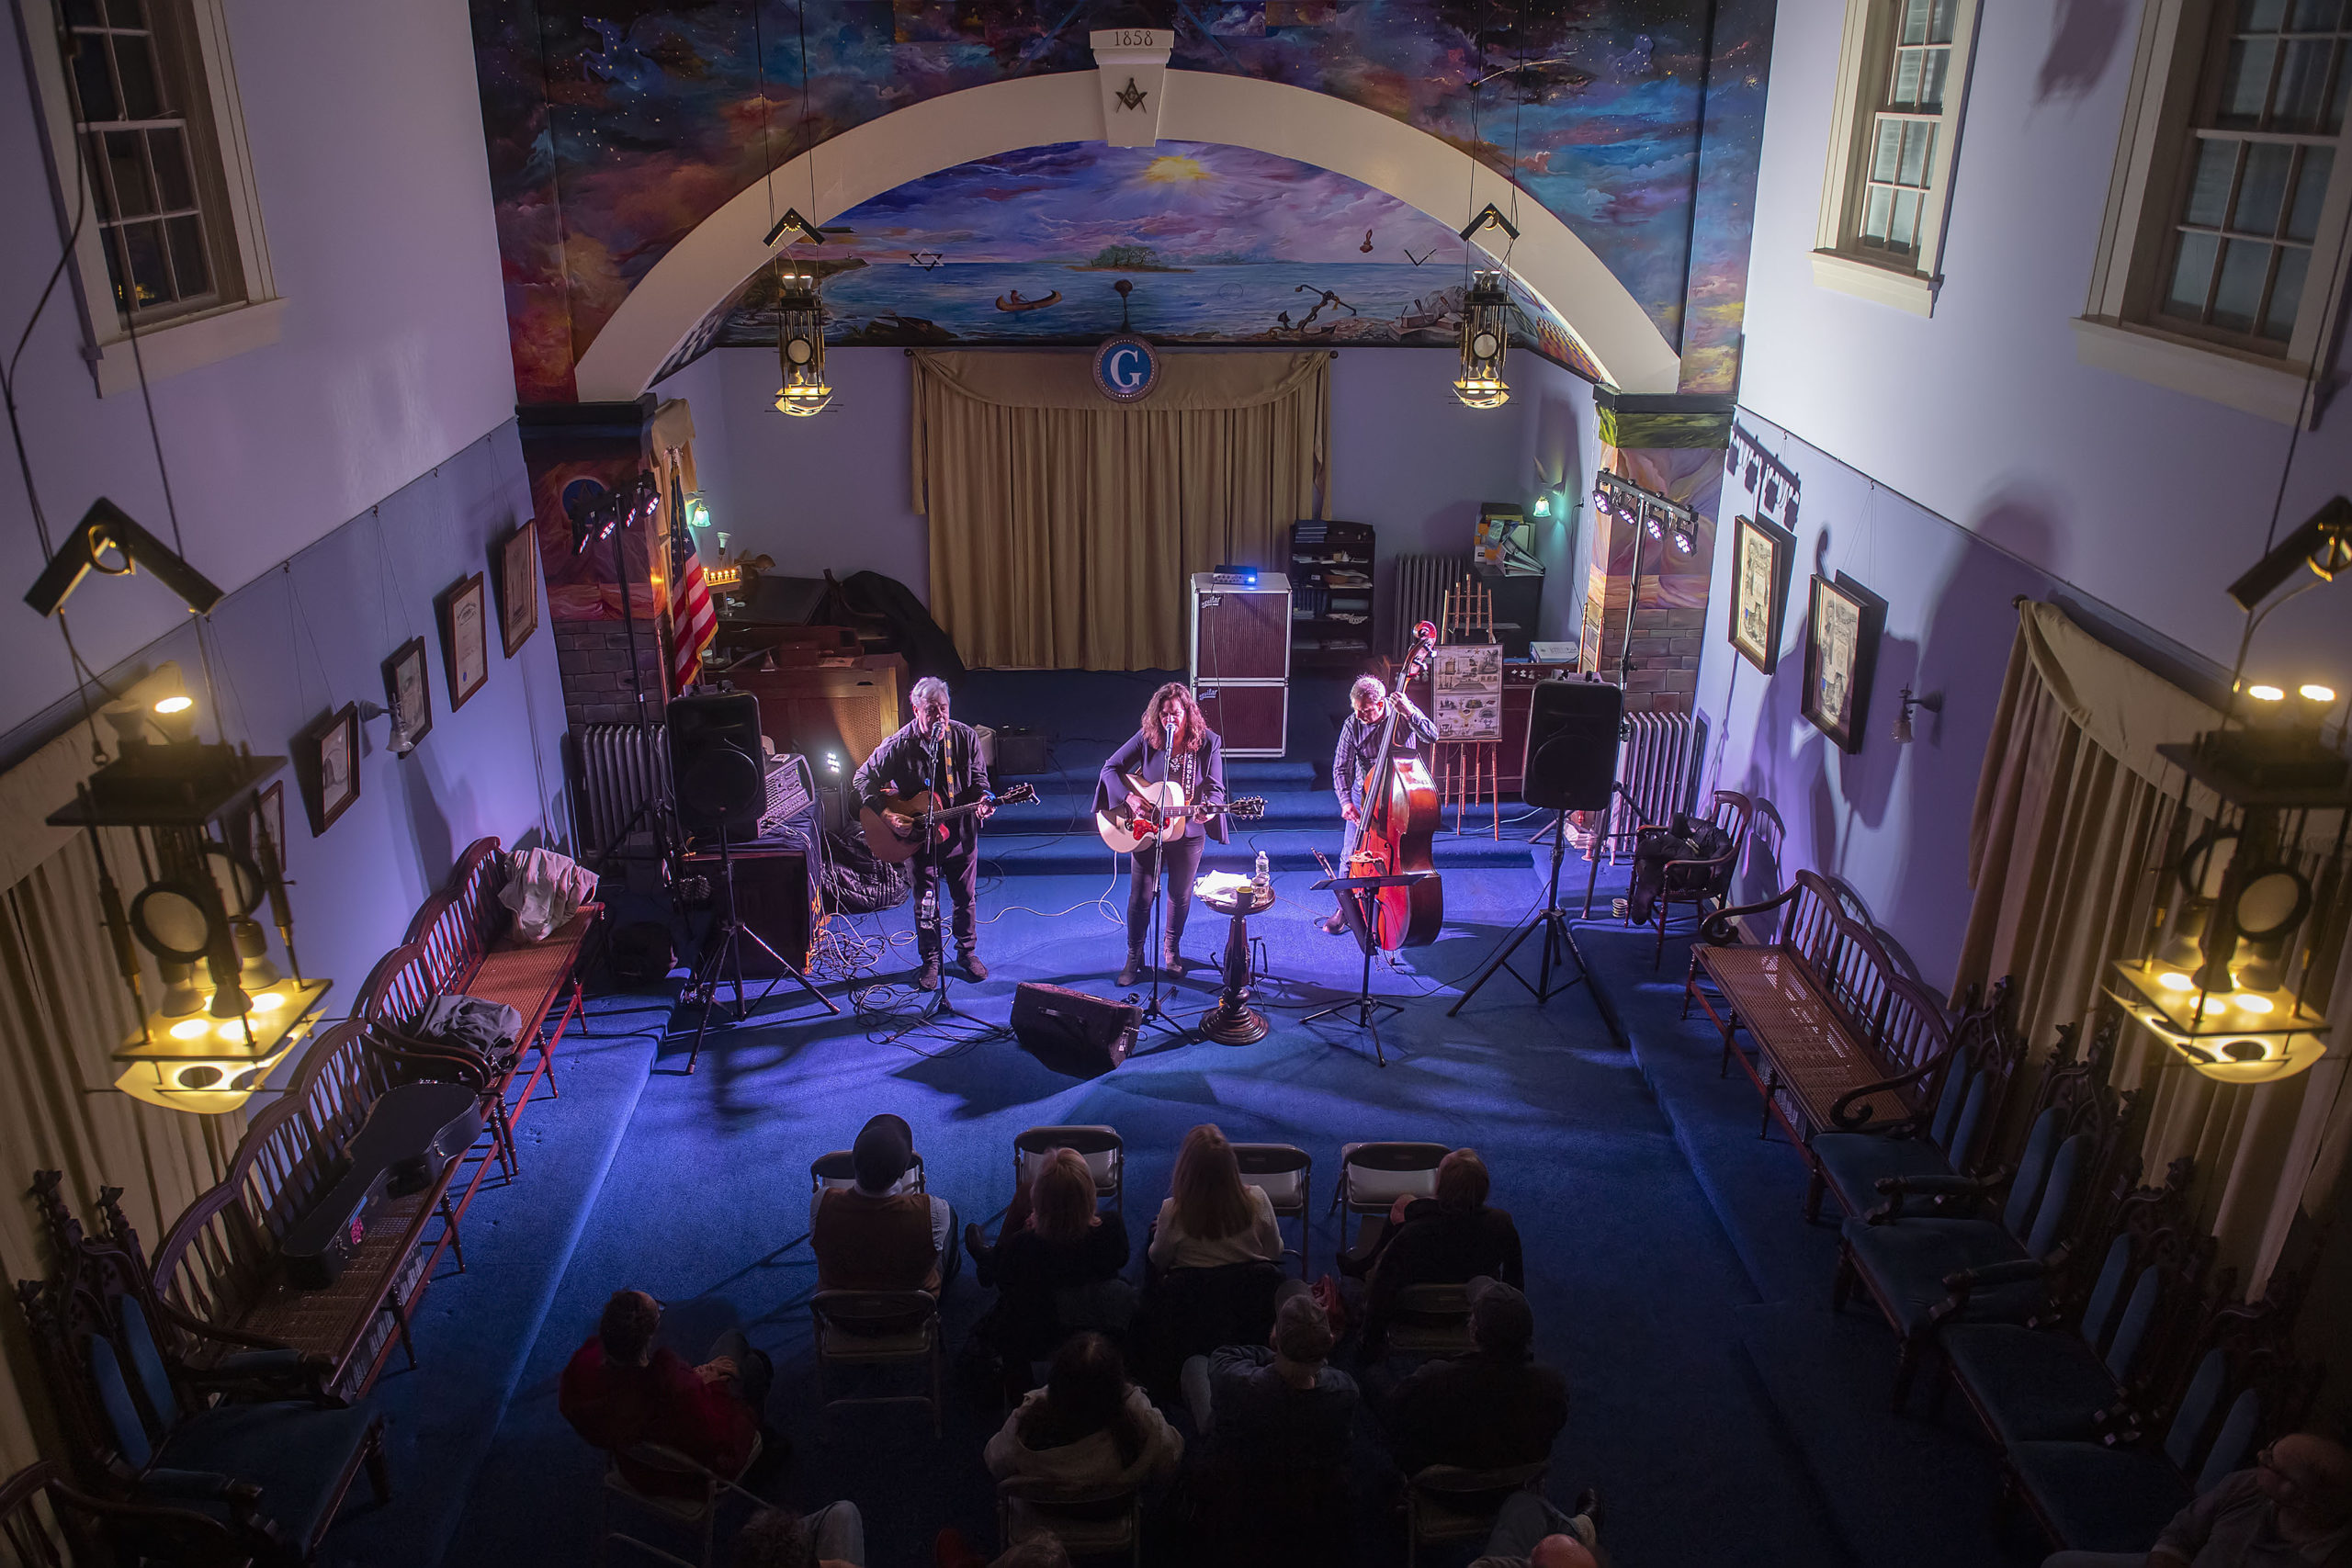 Caroline Doctorow and friends performed at the Masonic Temple located in Sag Harbor Whaling Museum on Saturday night.       MICHAEL HELLER